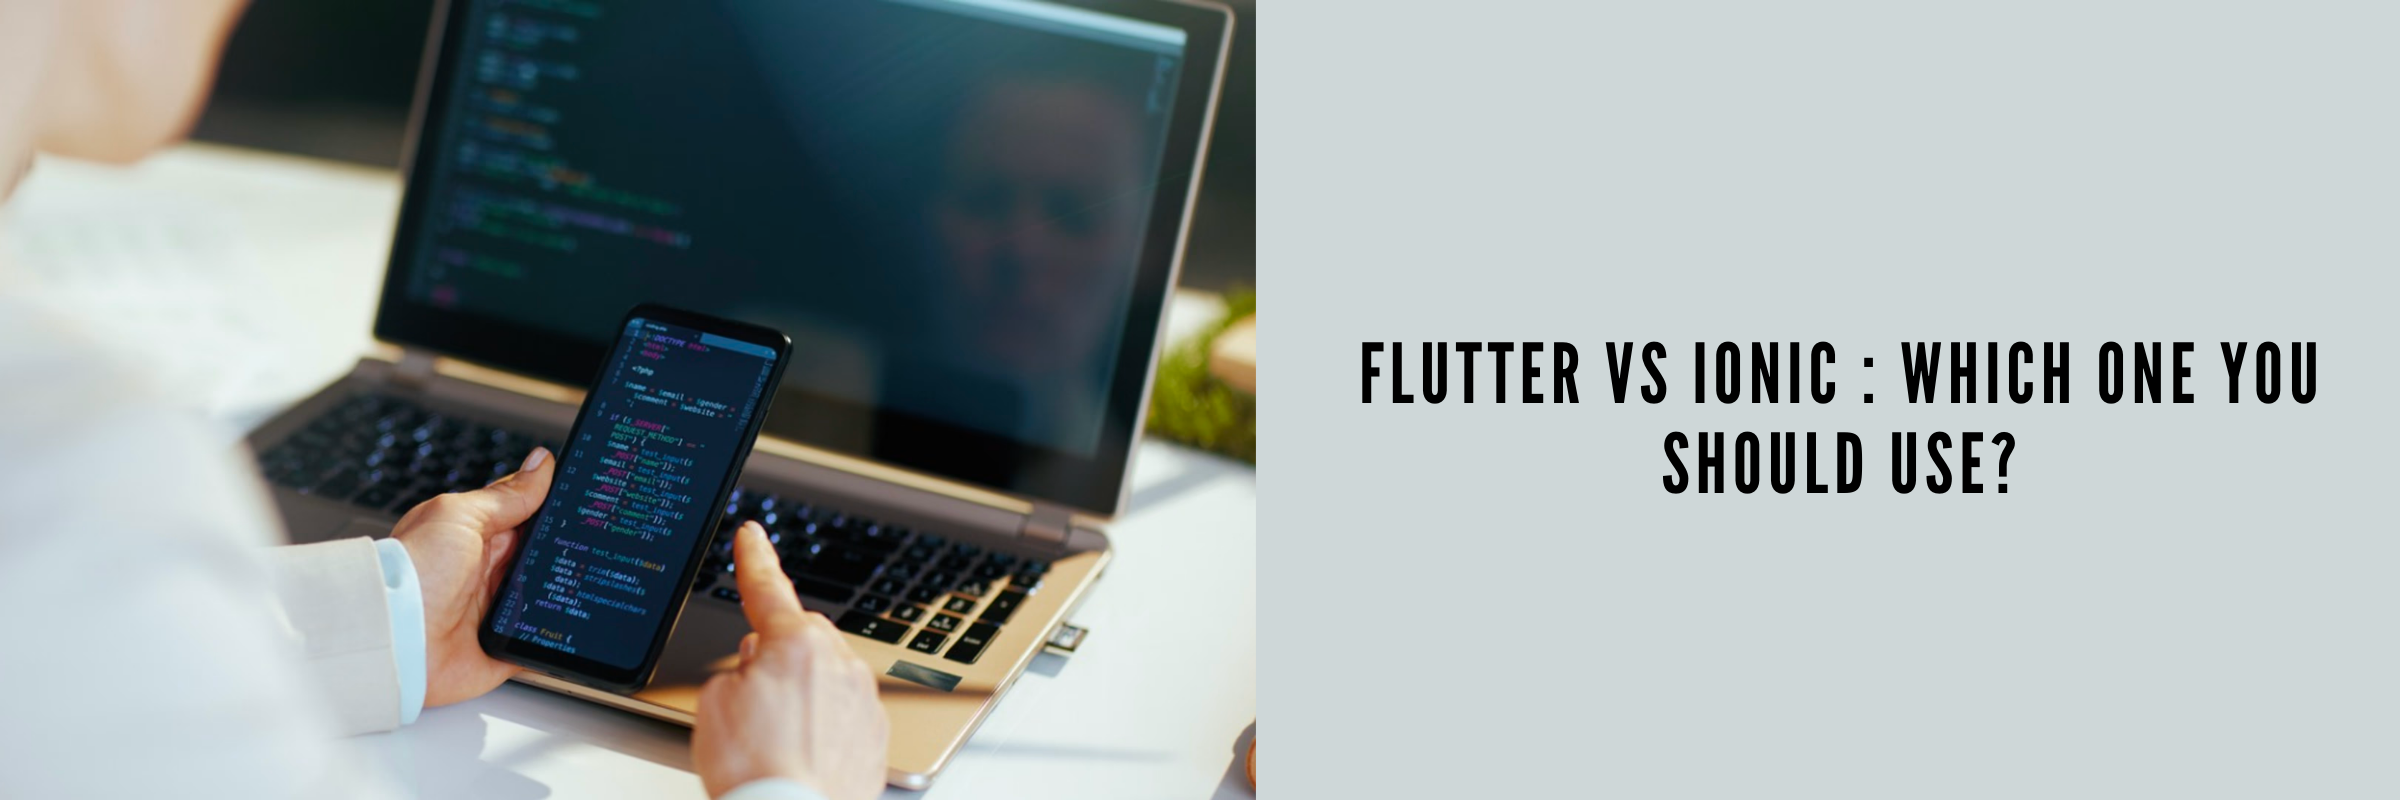 Flutter vs Ionic: Which One You Should Use?